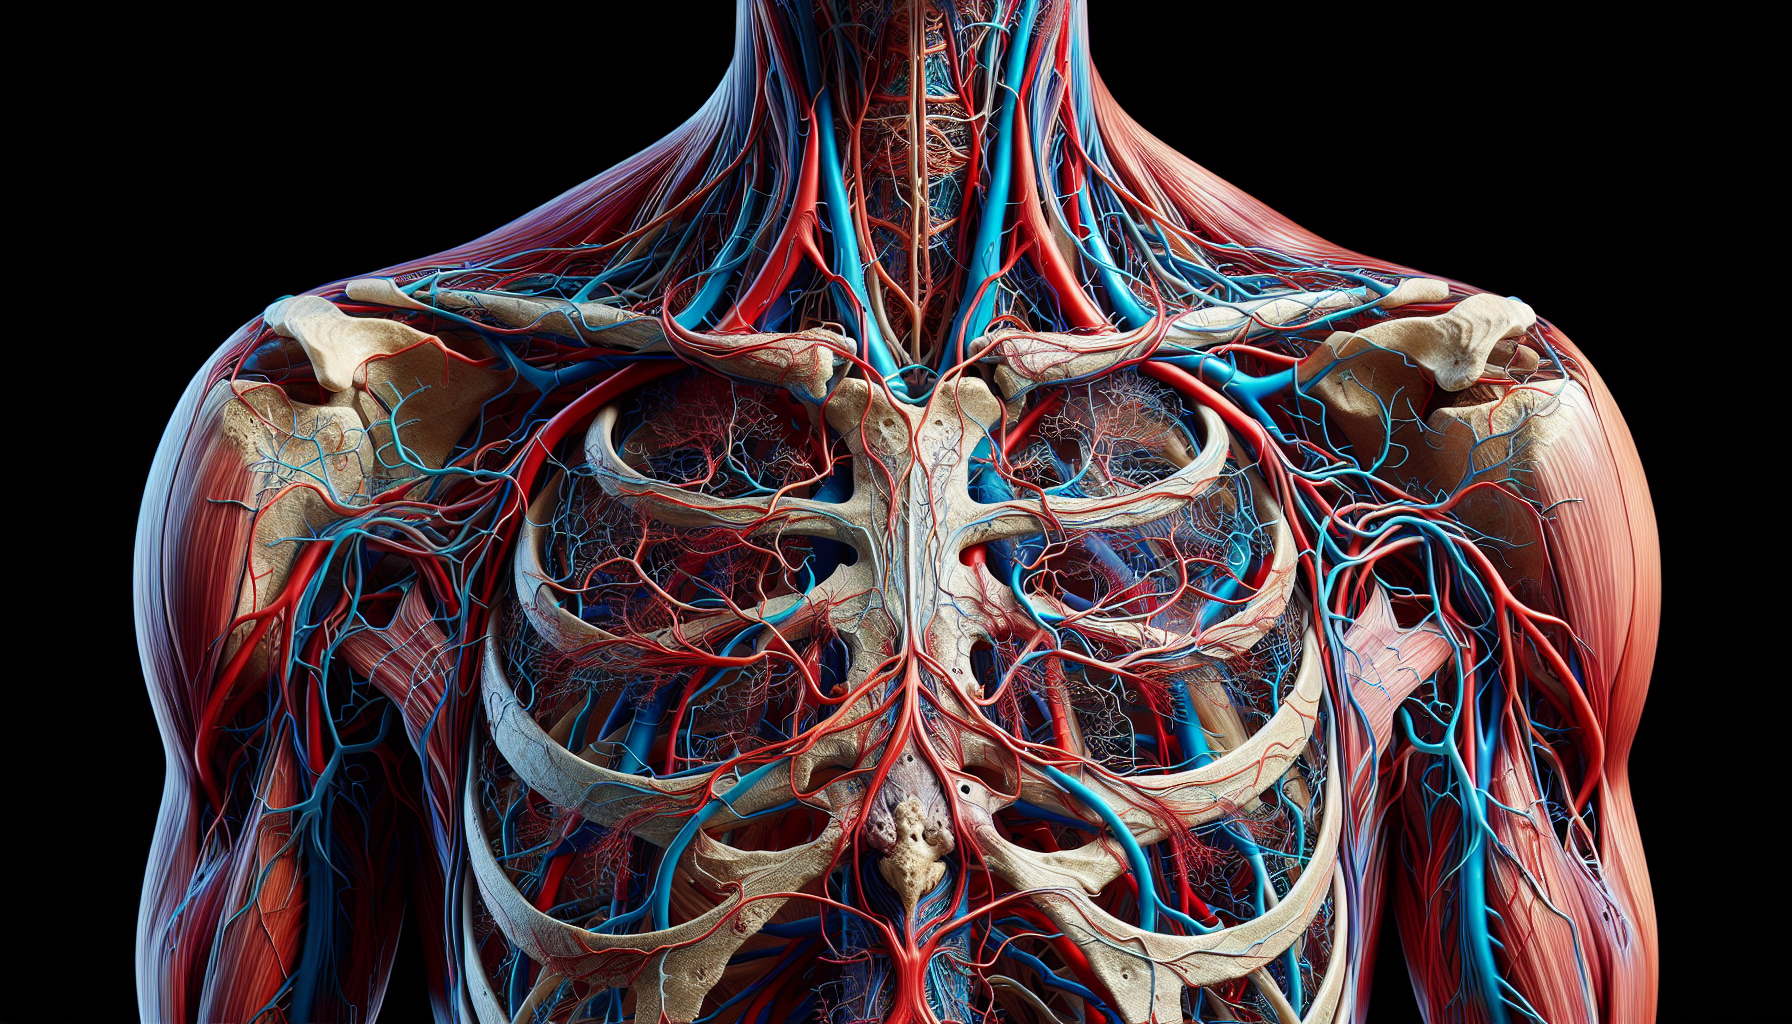 Illustration of the complex anatomy of the thoracic outlet including brachial plexus and skeletal components